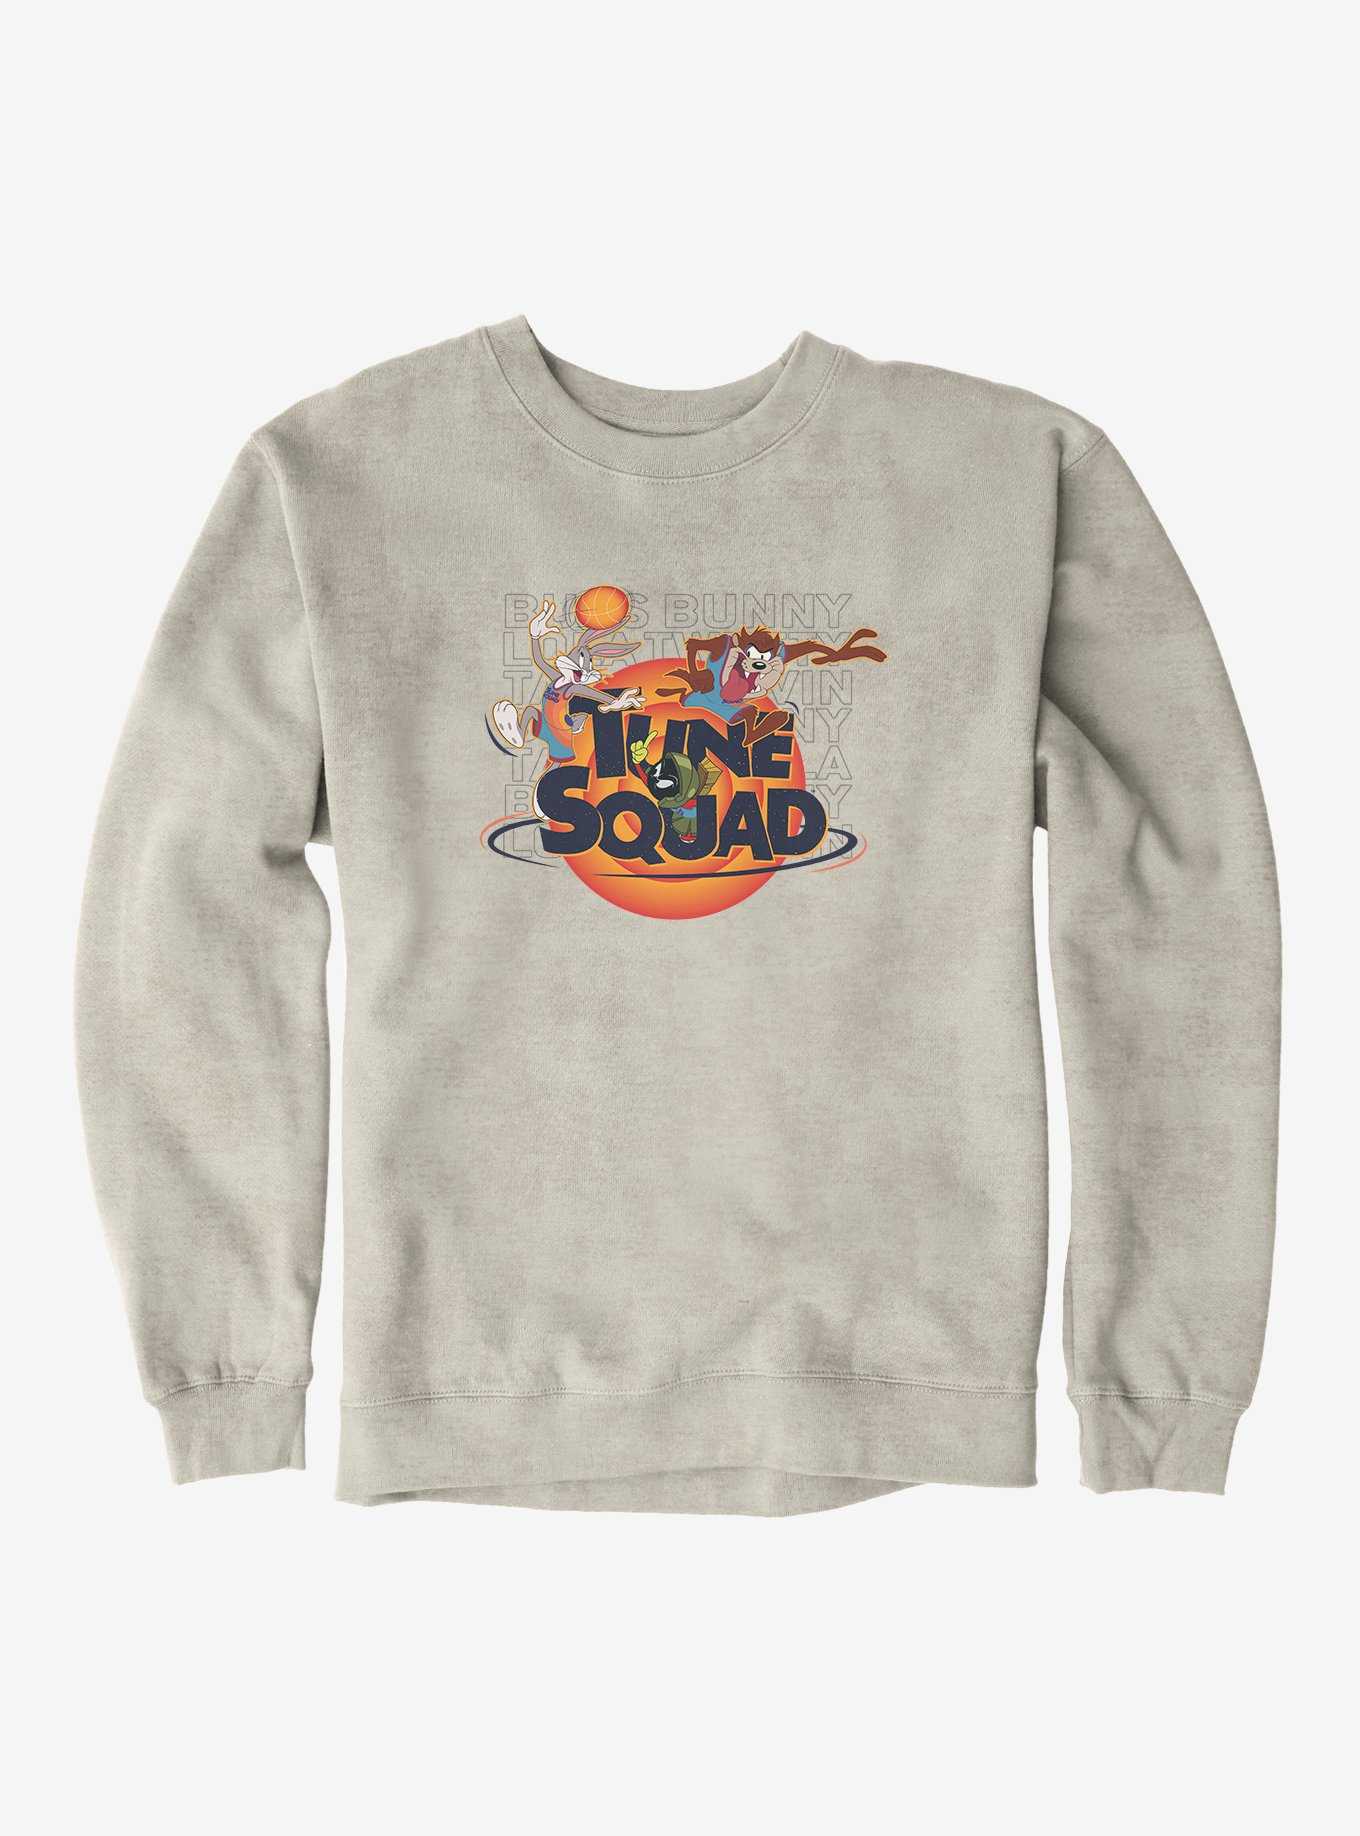 Space Jam: A New Legacy Bugs Bunny, Marvin The Martian, And Taz Tune Squad Sweatshirt, , hi-res